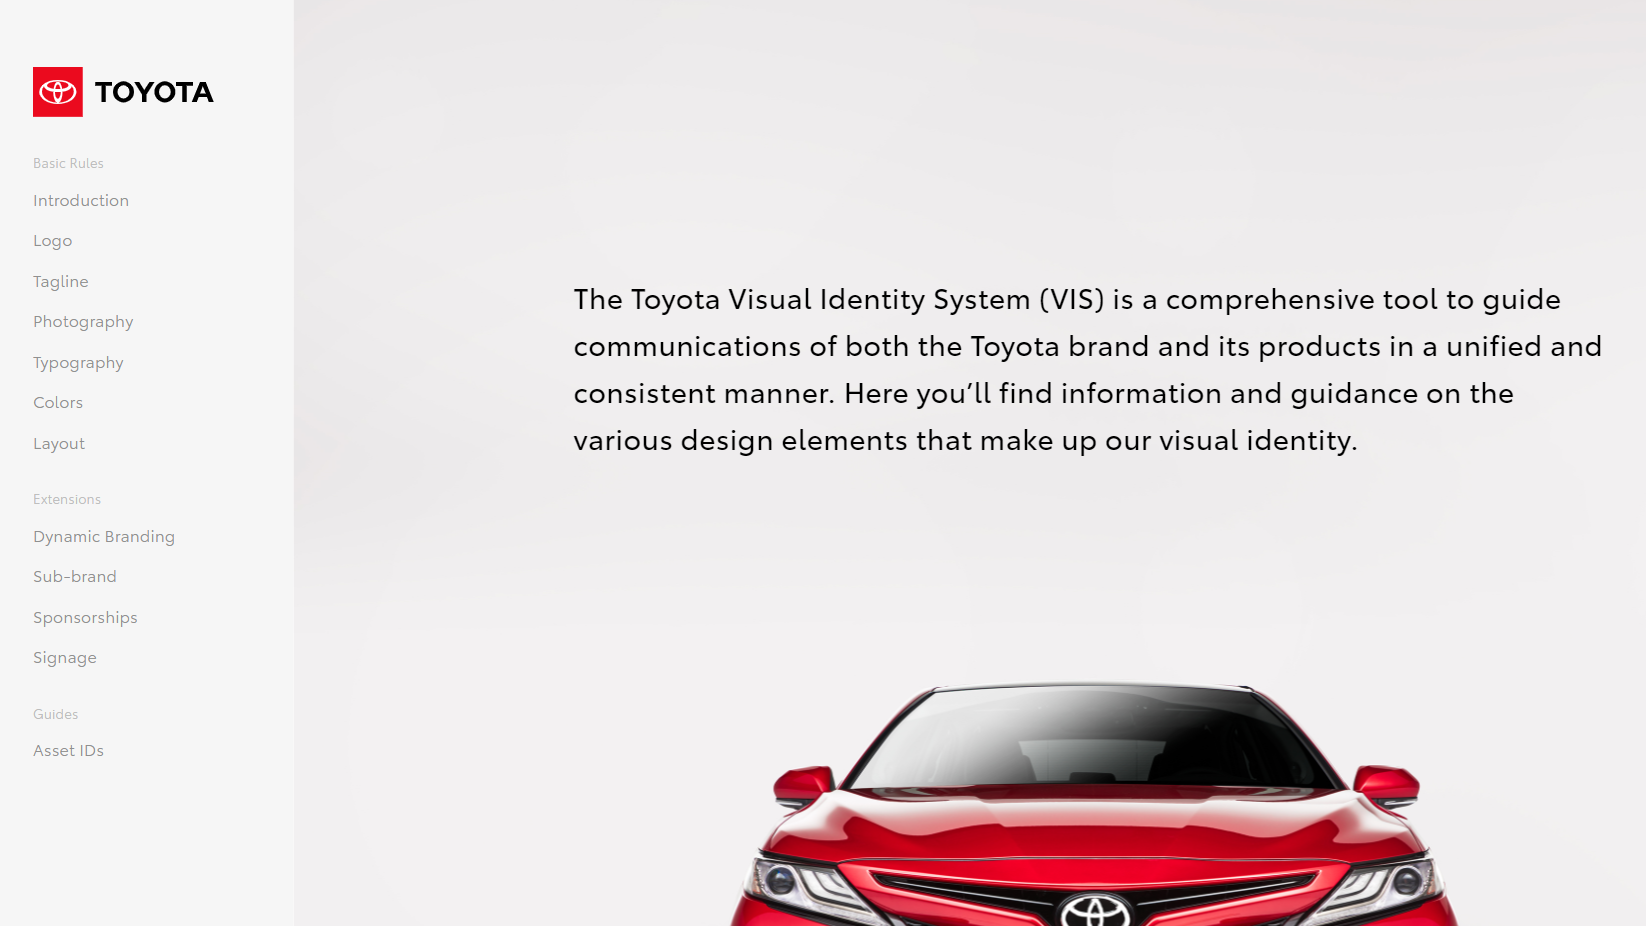 Toyota's Brand Guide